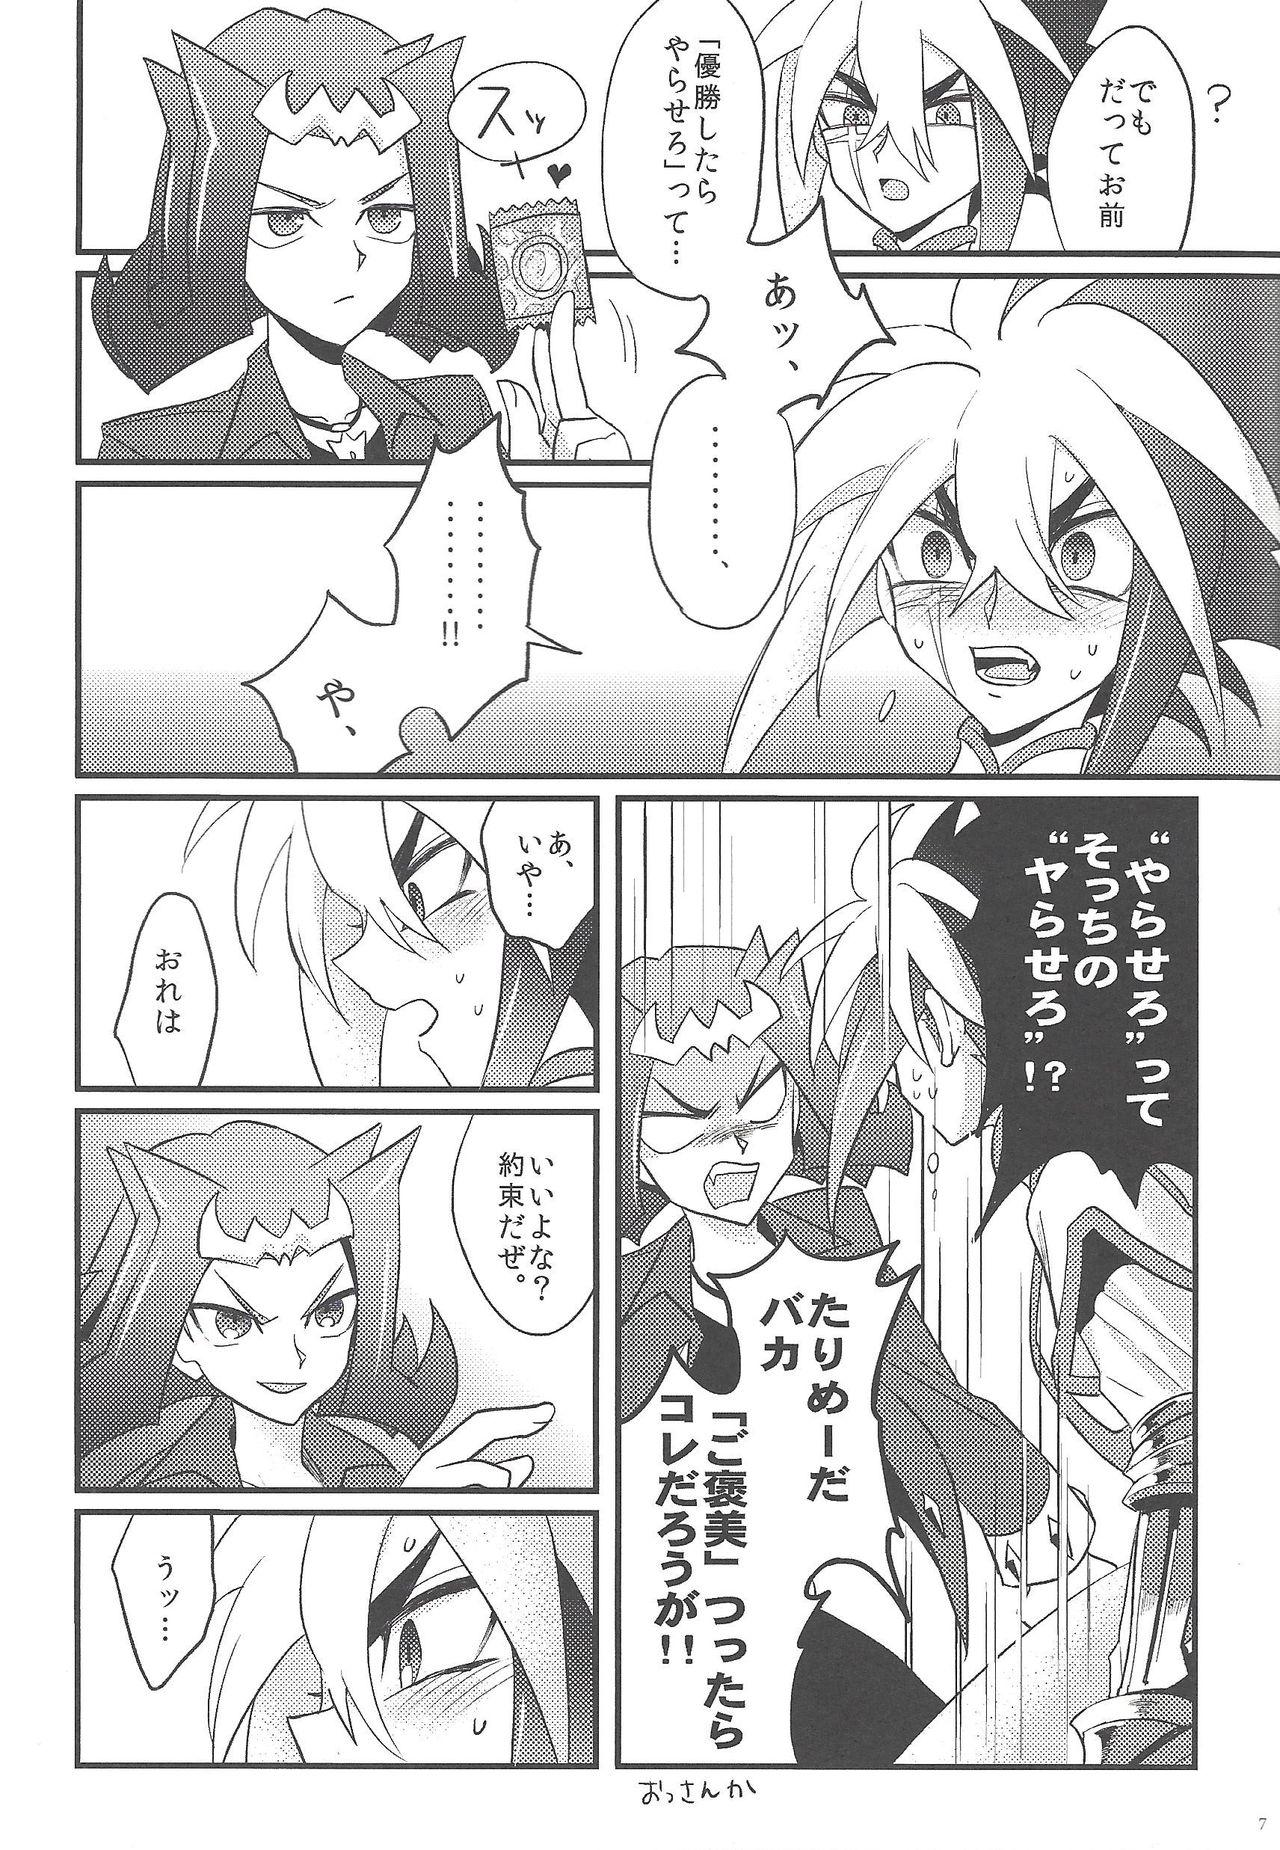 Longhair no credit service - Yu-gi-oh zexal Young Tits - Page 6